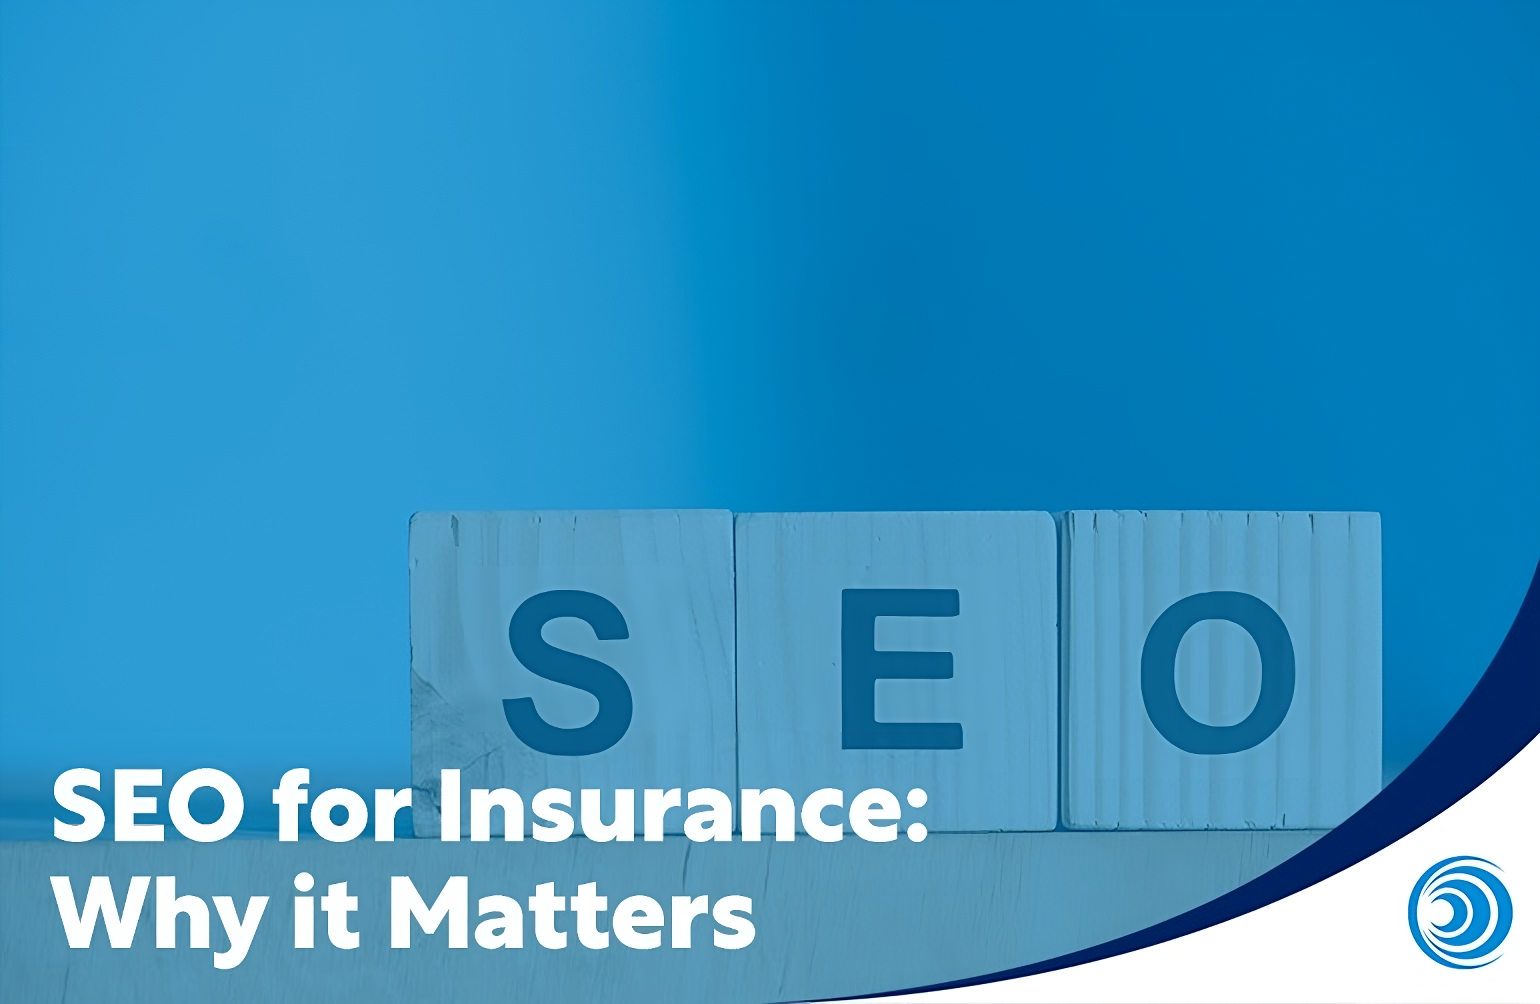 SEO for Insurance: Why it Matters